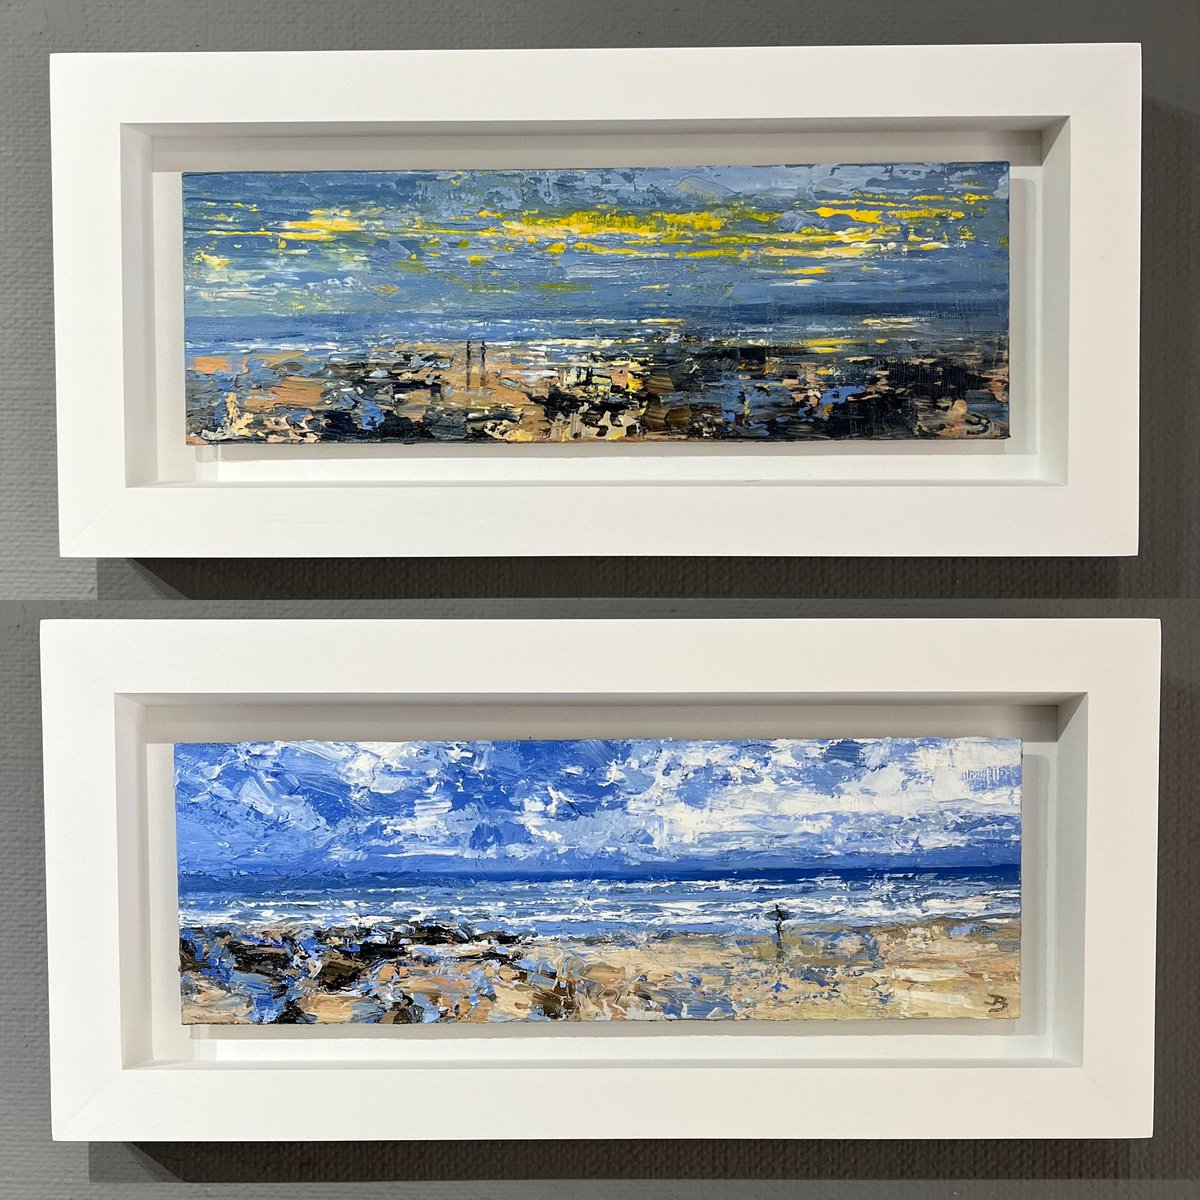 Two beautiful John Brenton paintings sold over the weekend and are now on their way to the USA! 🇺🇸 

#johnbrenton #collectart #lymm #cheshire